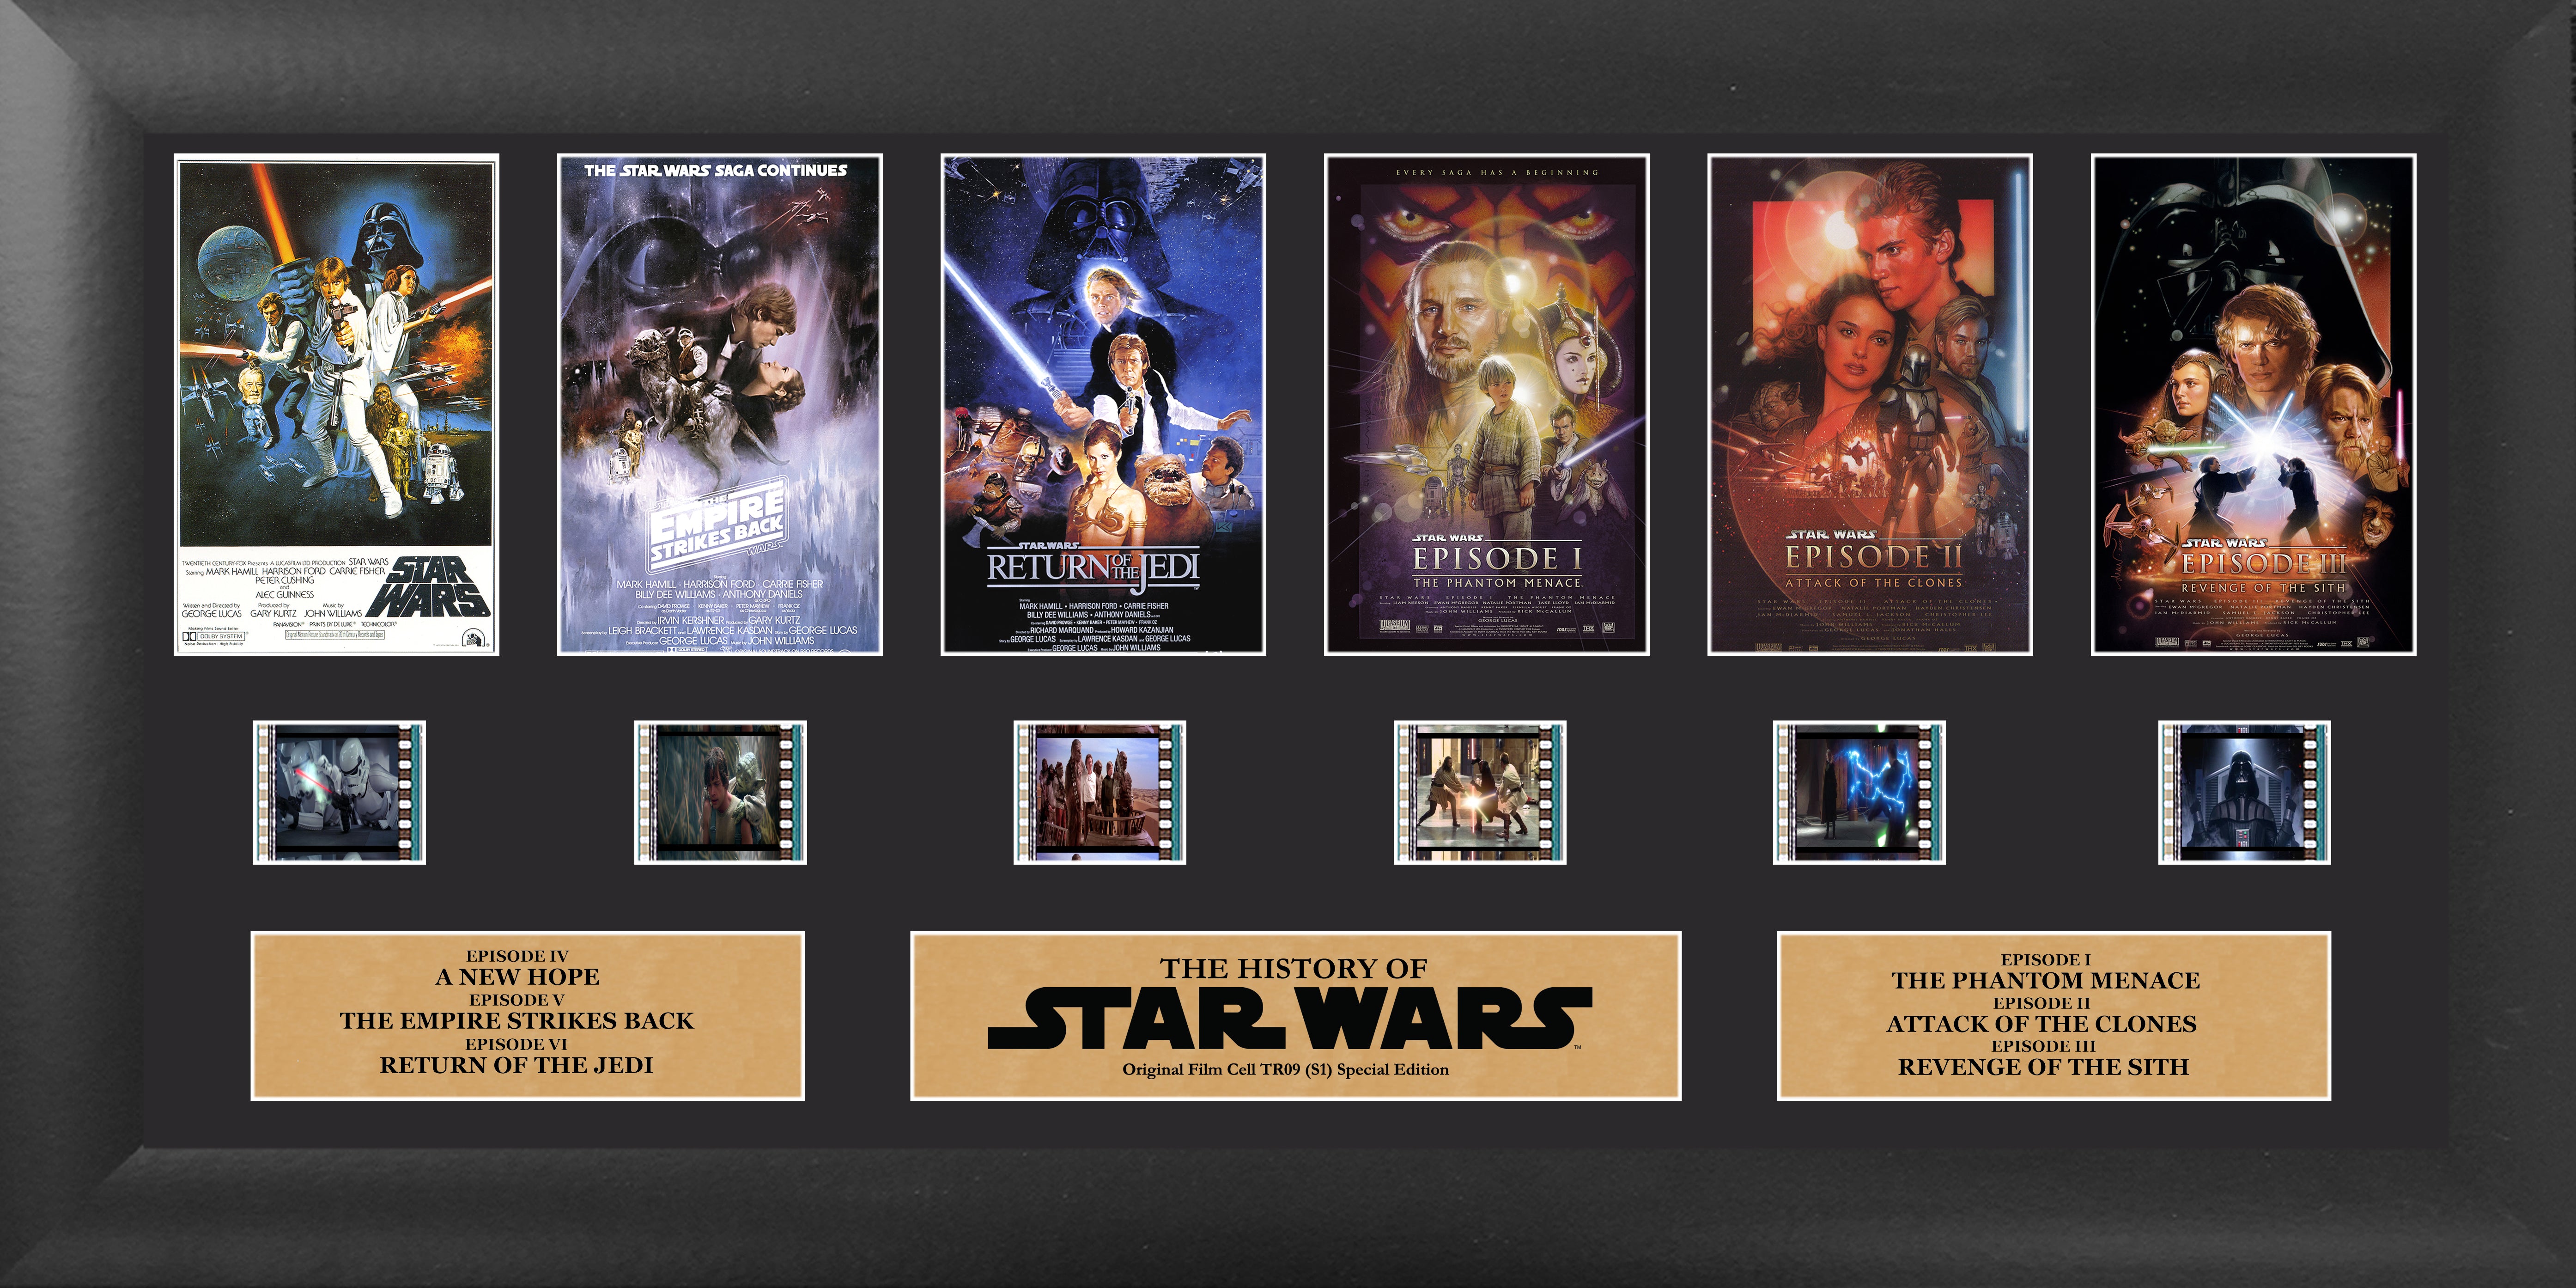 Star Wars: Episodes 1-6 Tribute (Through The Ages) FilmCells Presentation Limited Edition Deluxe Wall Art USTR09